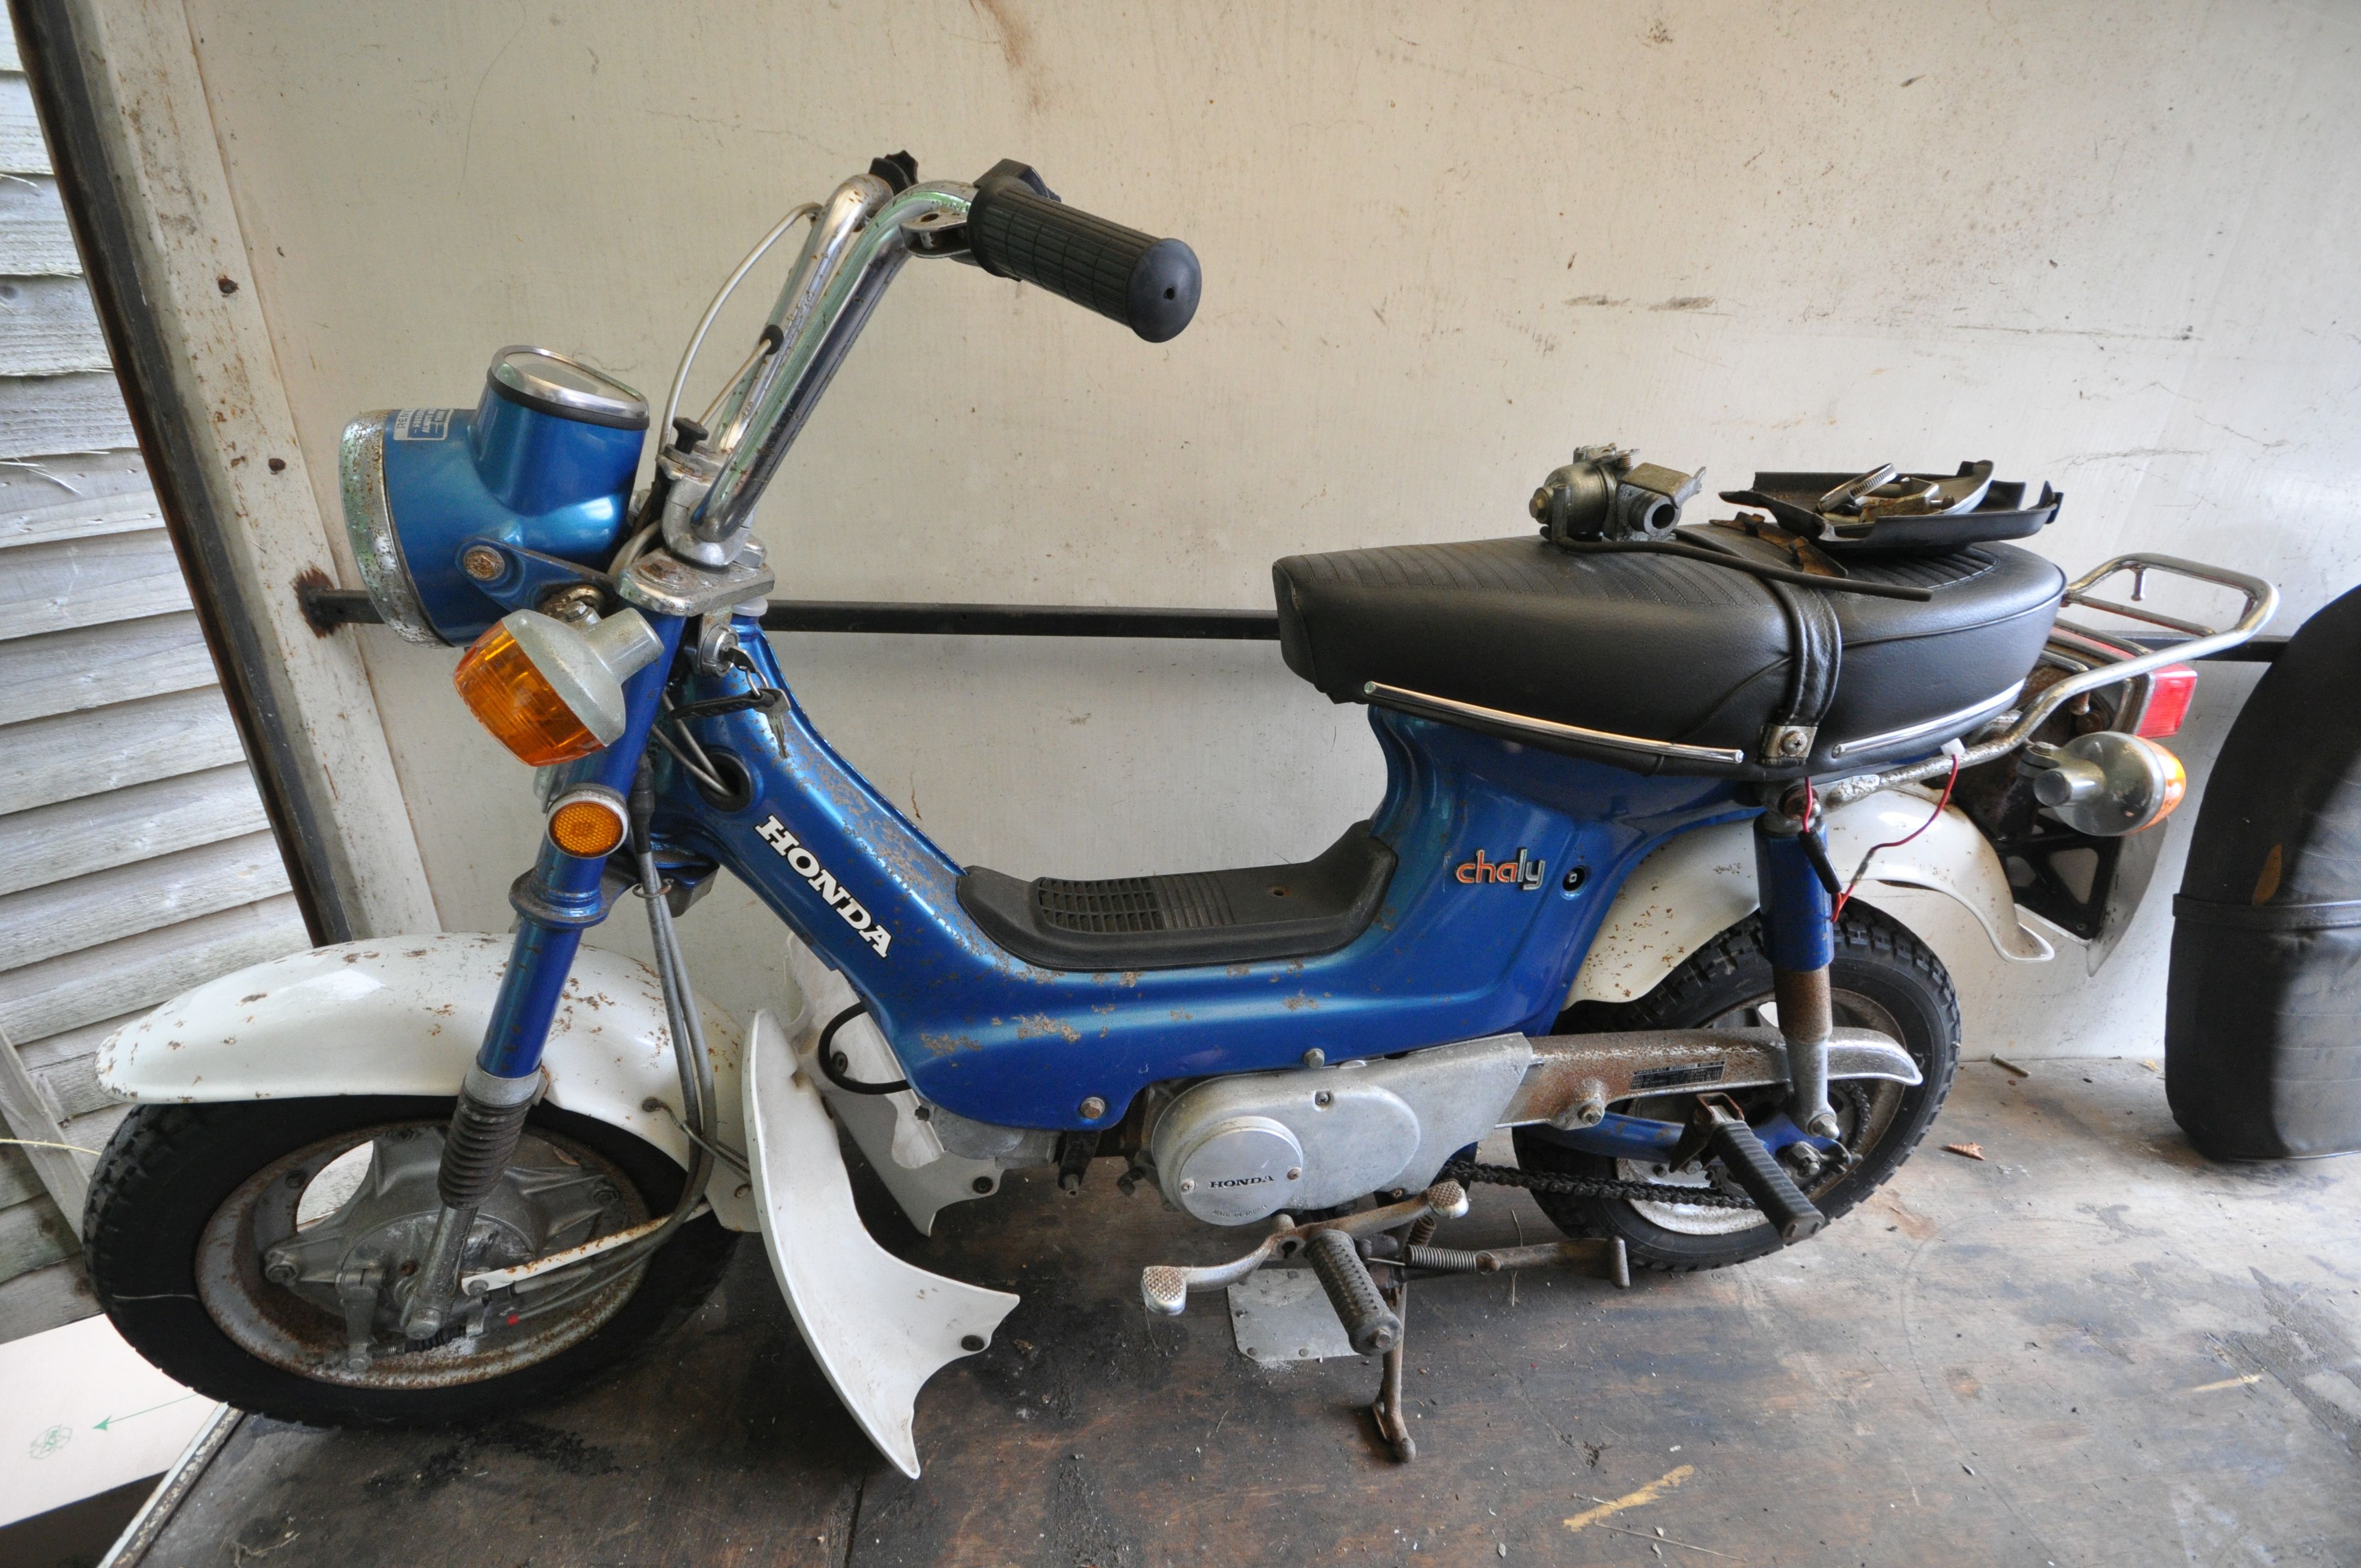 A 1975 HONDA CHALY - LBF 597P - This moped was first registered in August 1975, it has a 72cc petrol